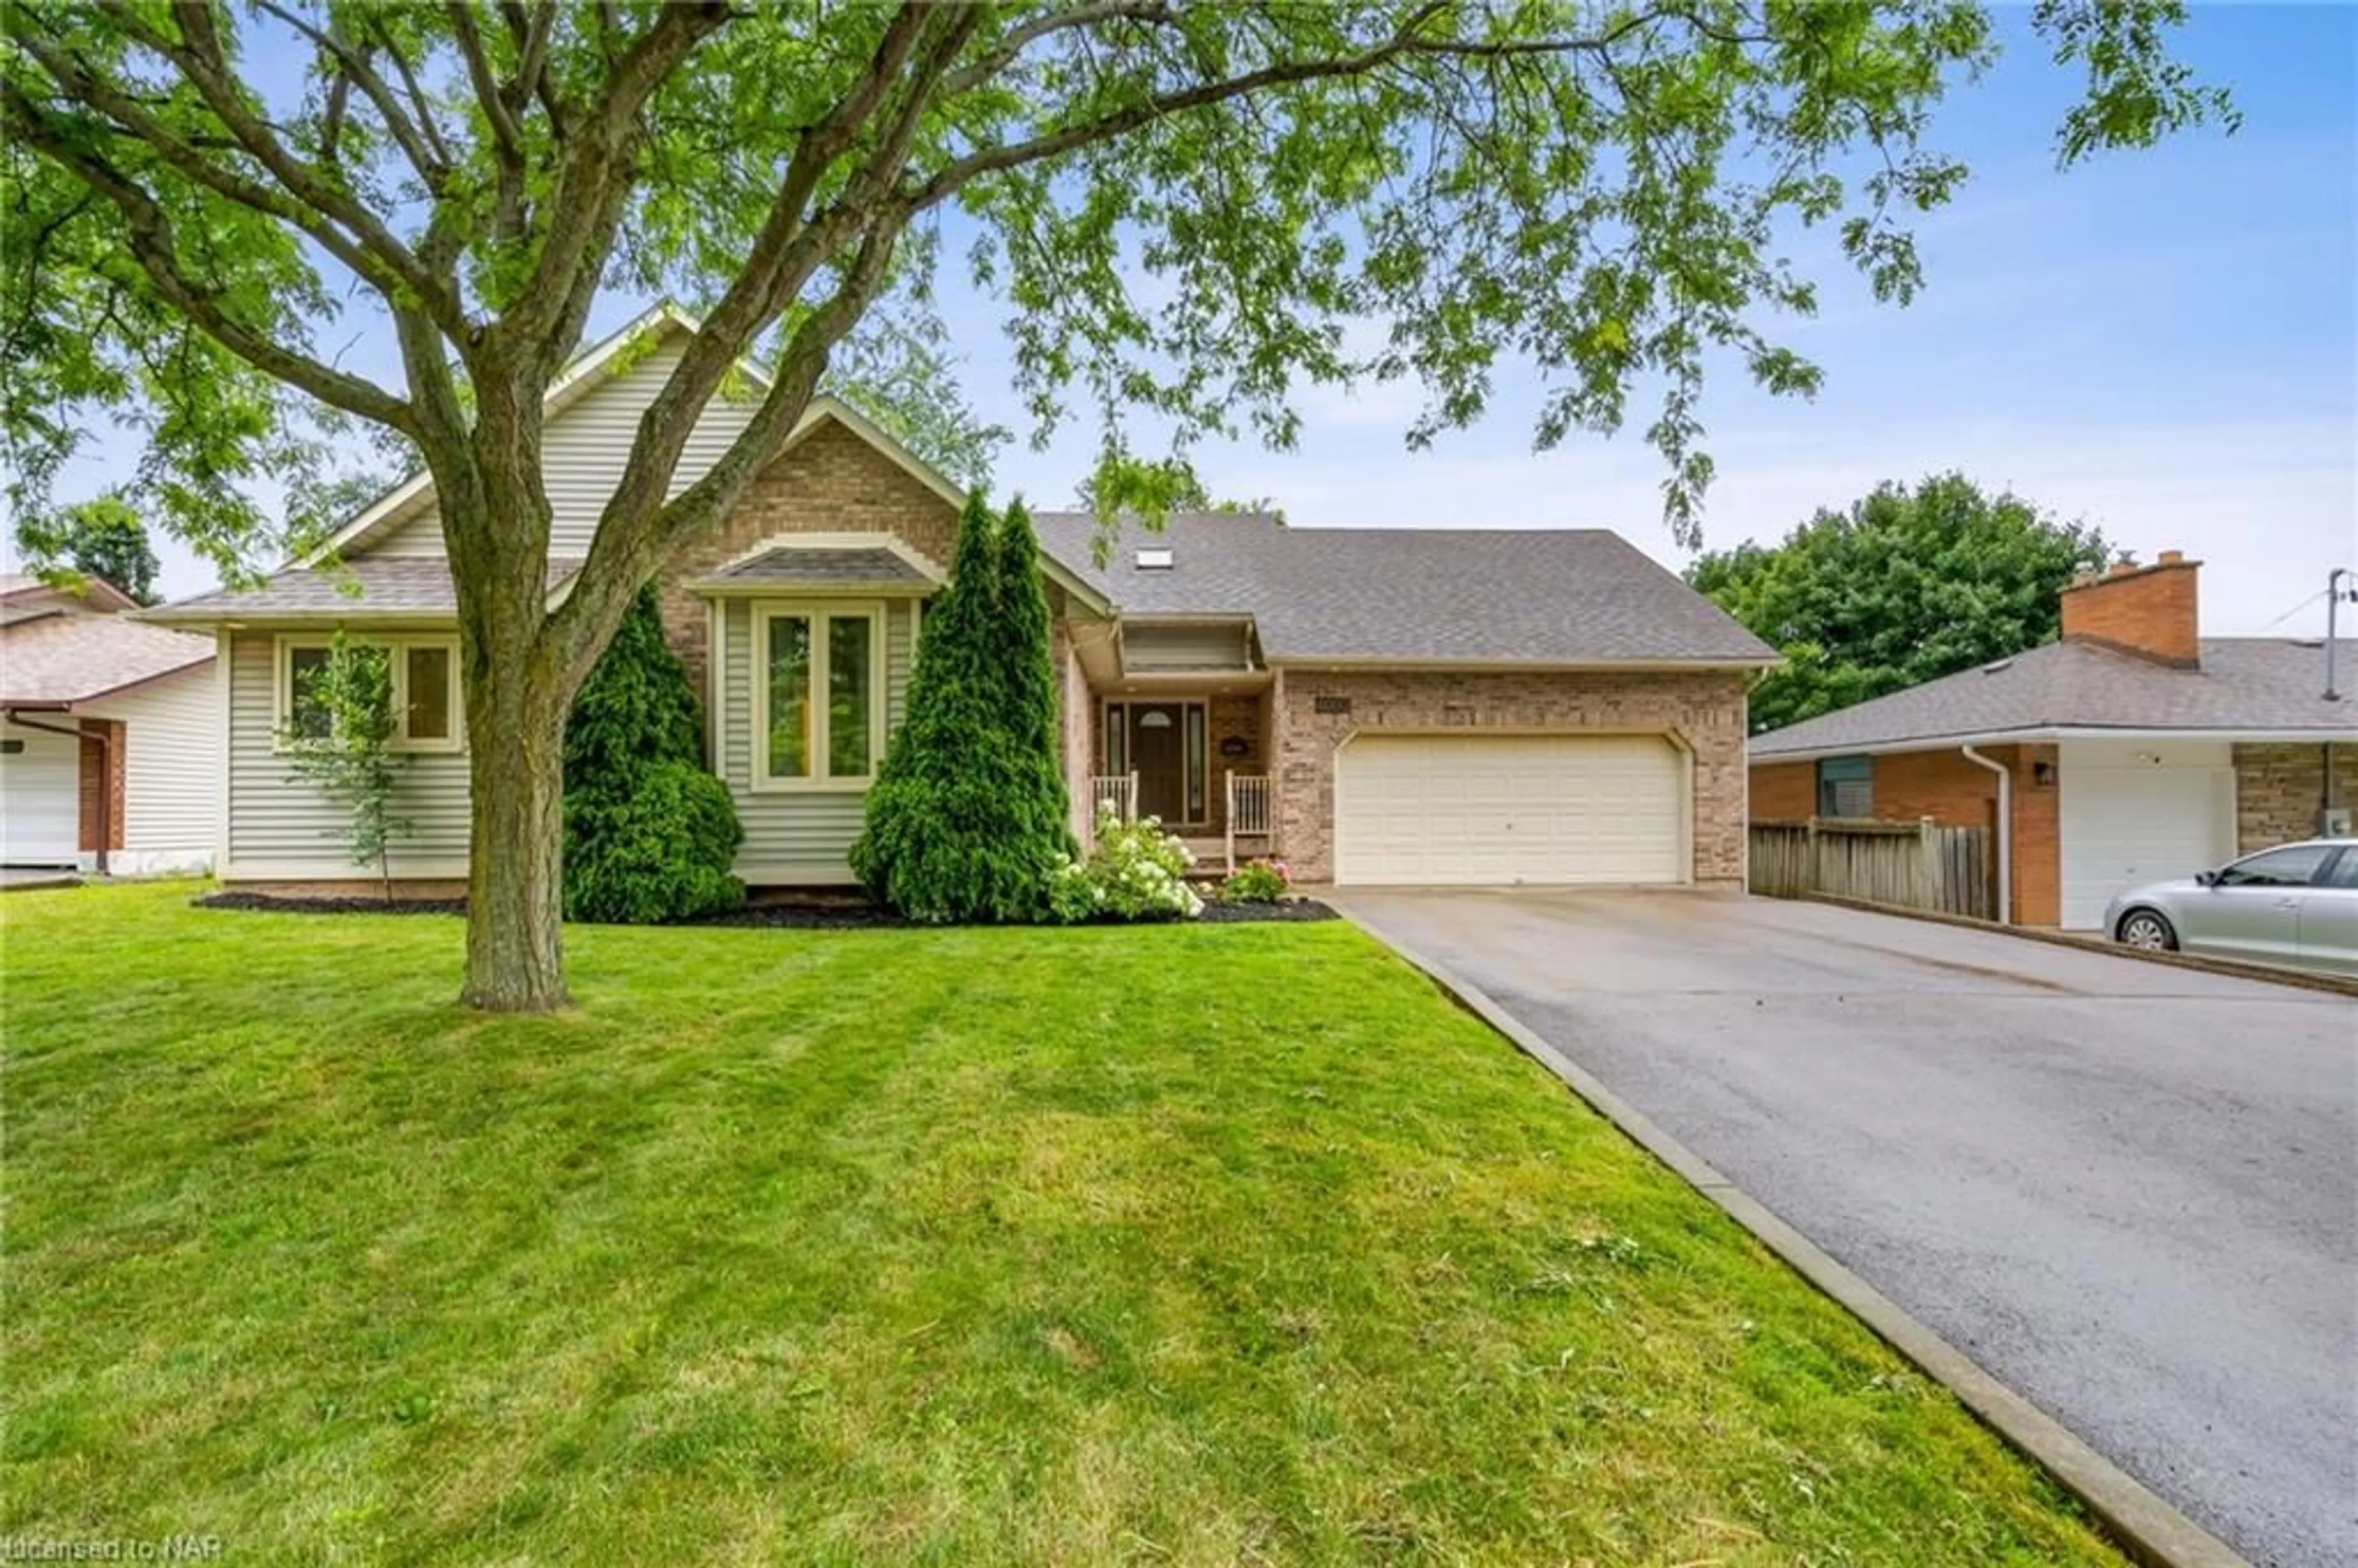 Frontside or backside of a home for 4092 Barry Dr, Beamsville Ontario L0R 1B7